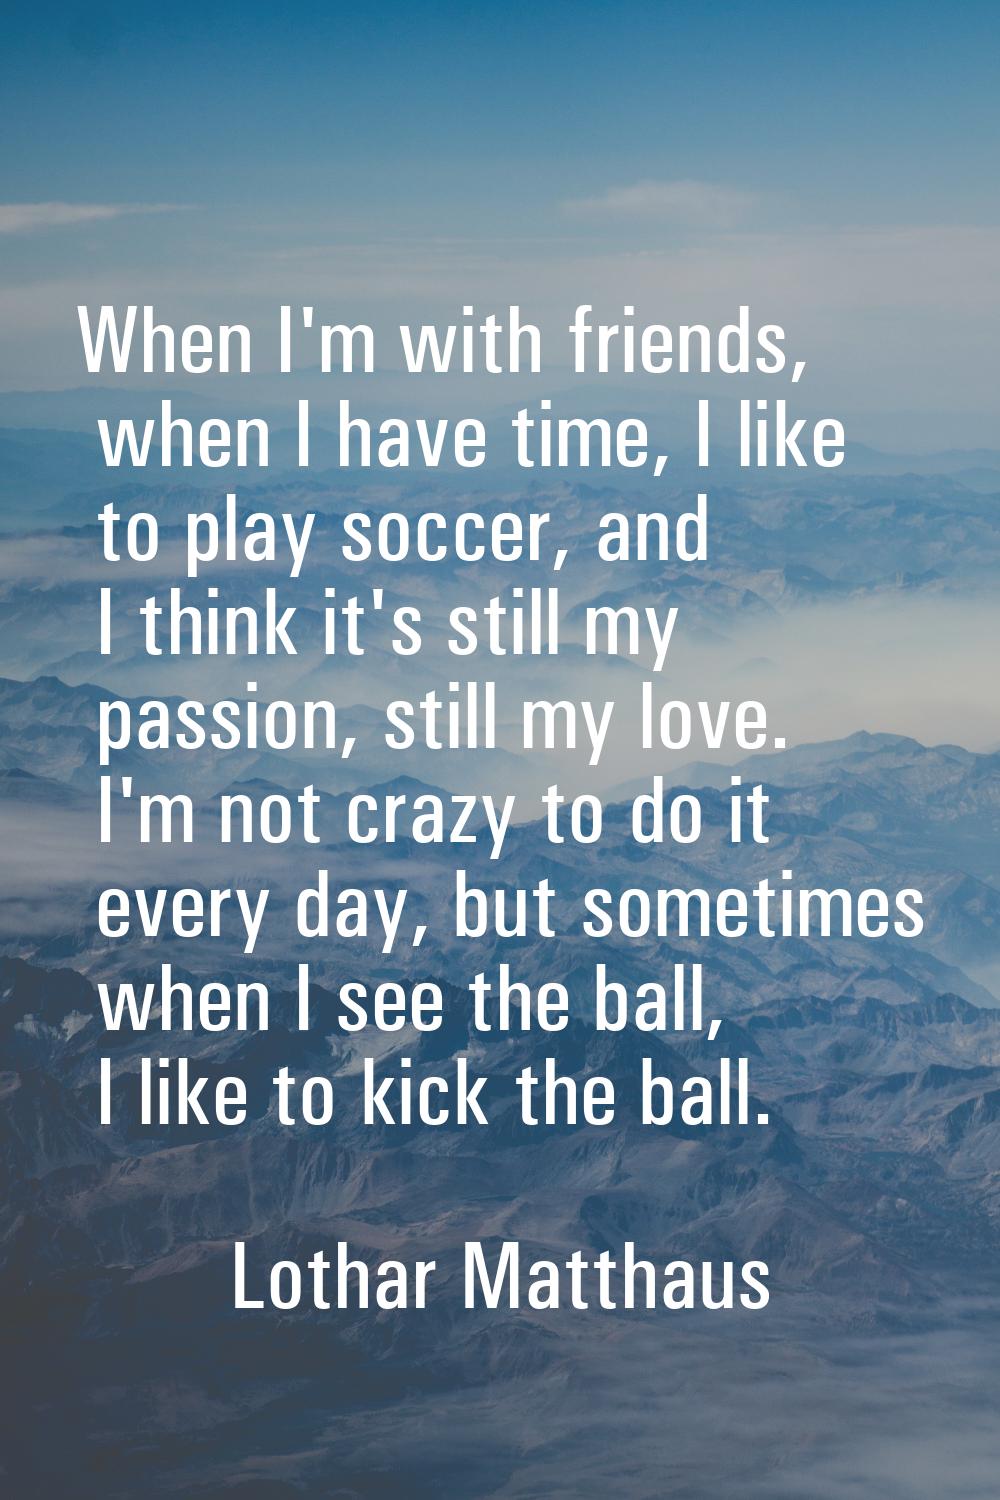 When I'm with friends, when I have time, I like to play soccer, and I think it's still my passion, 